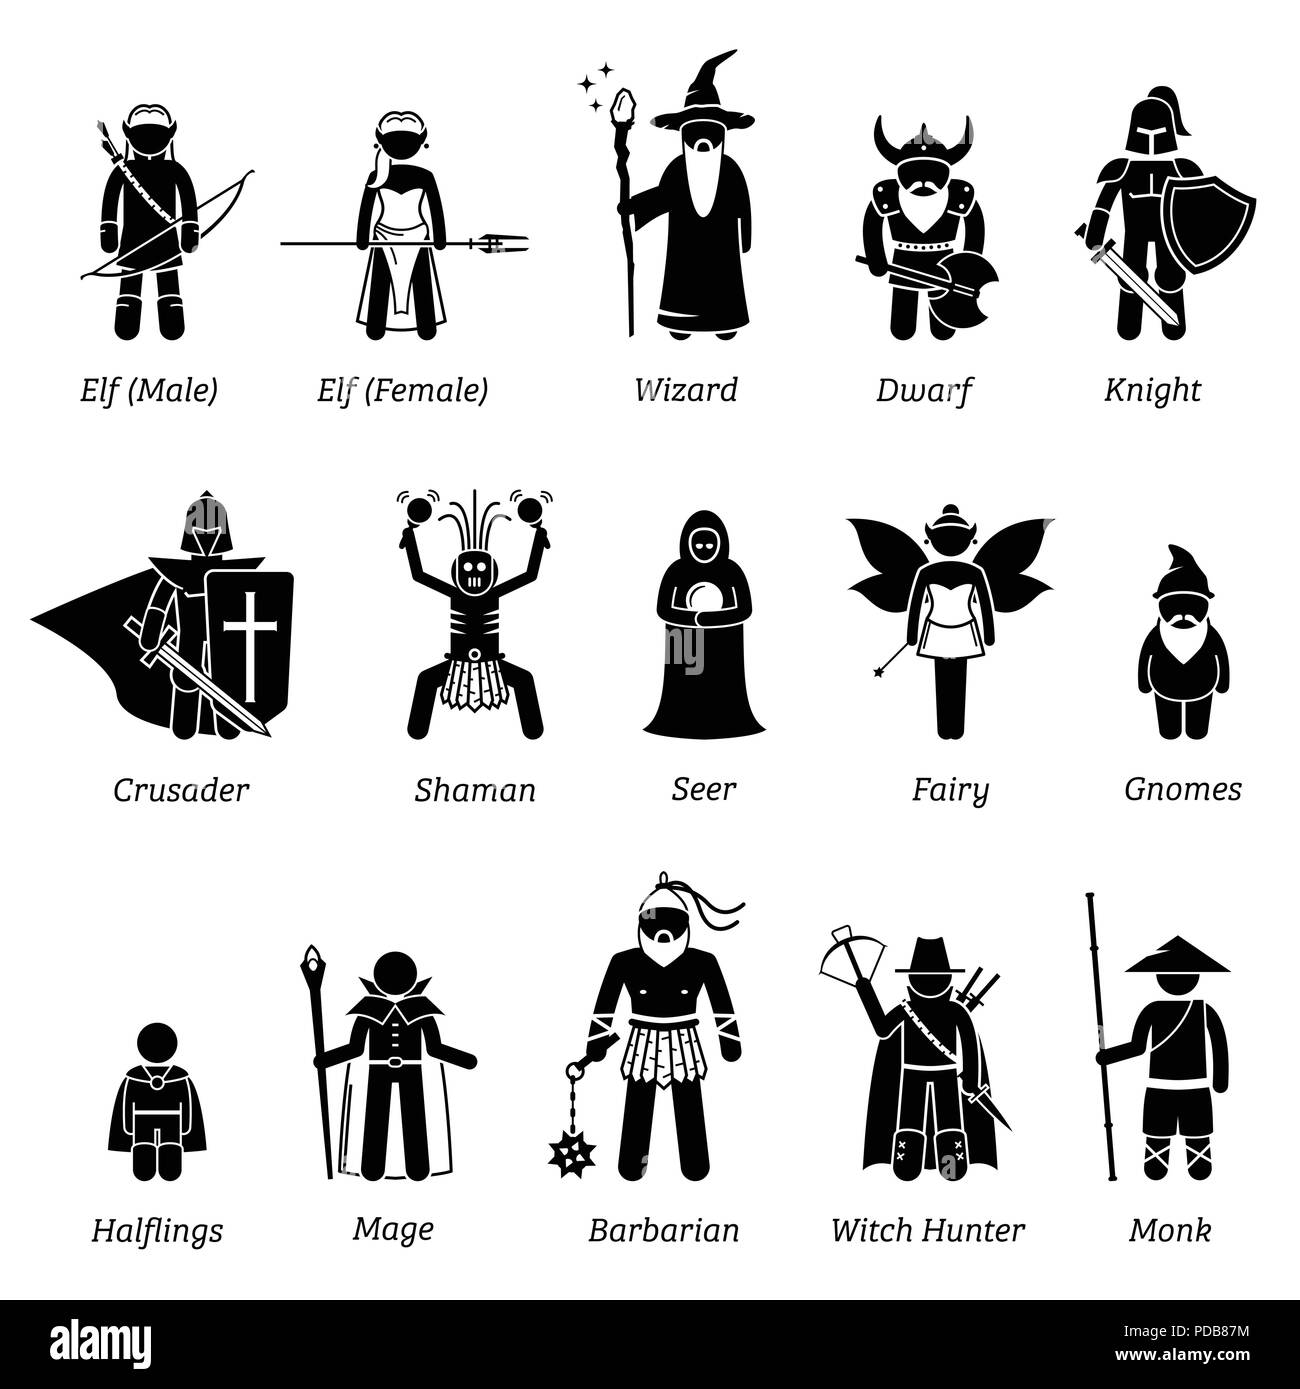 Ancient medieval fantasy characters classes and warriors icon set. Stock Vector